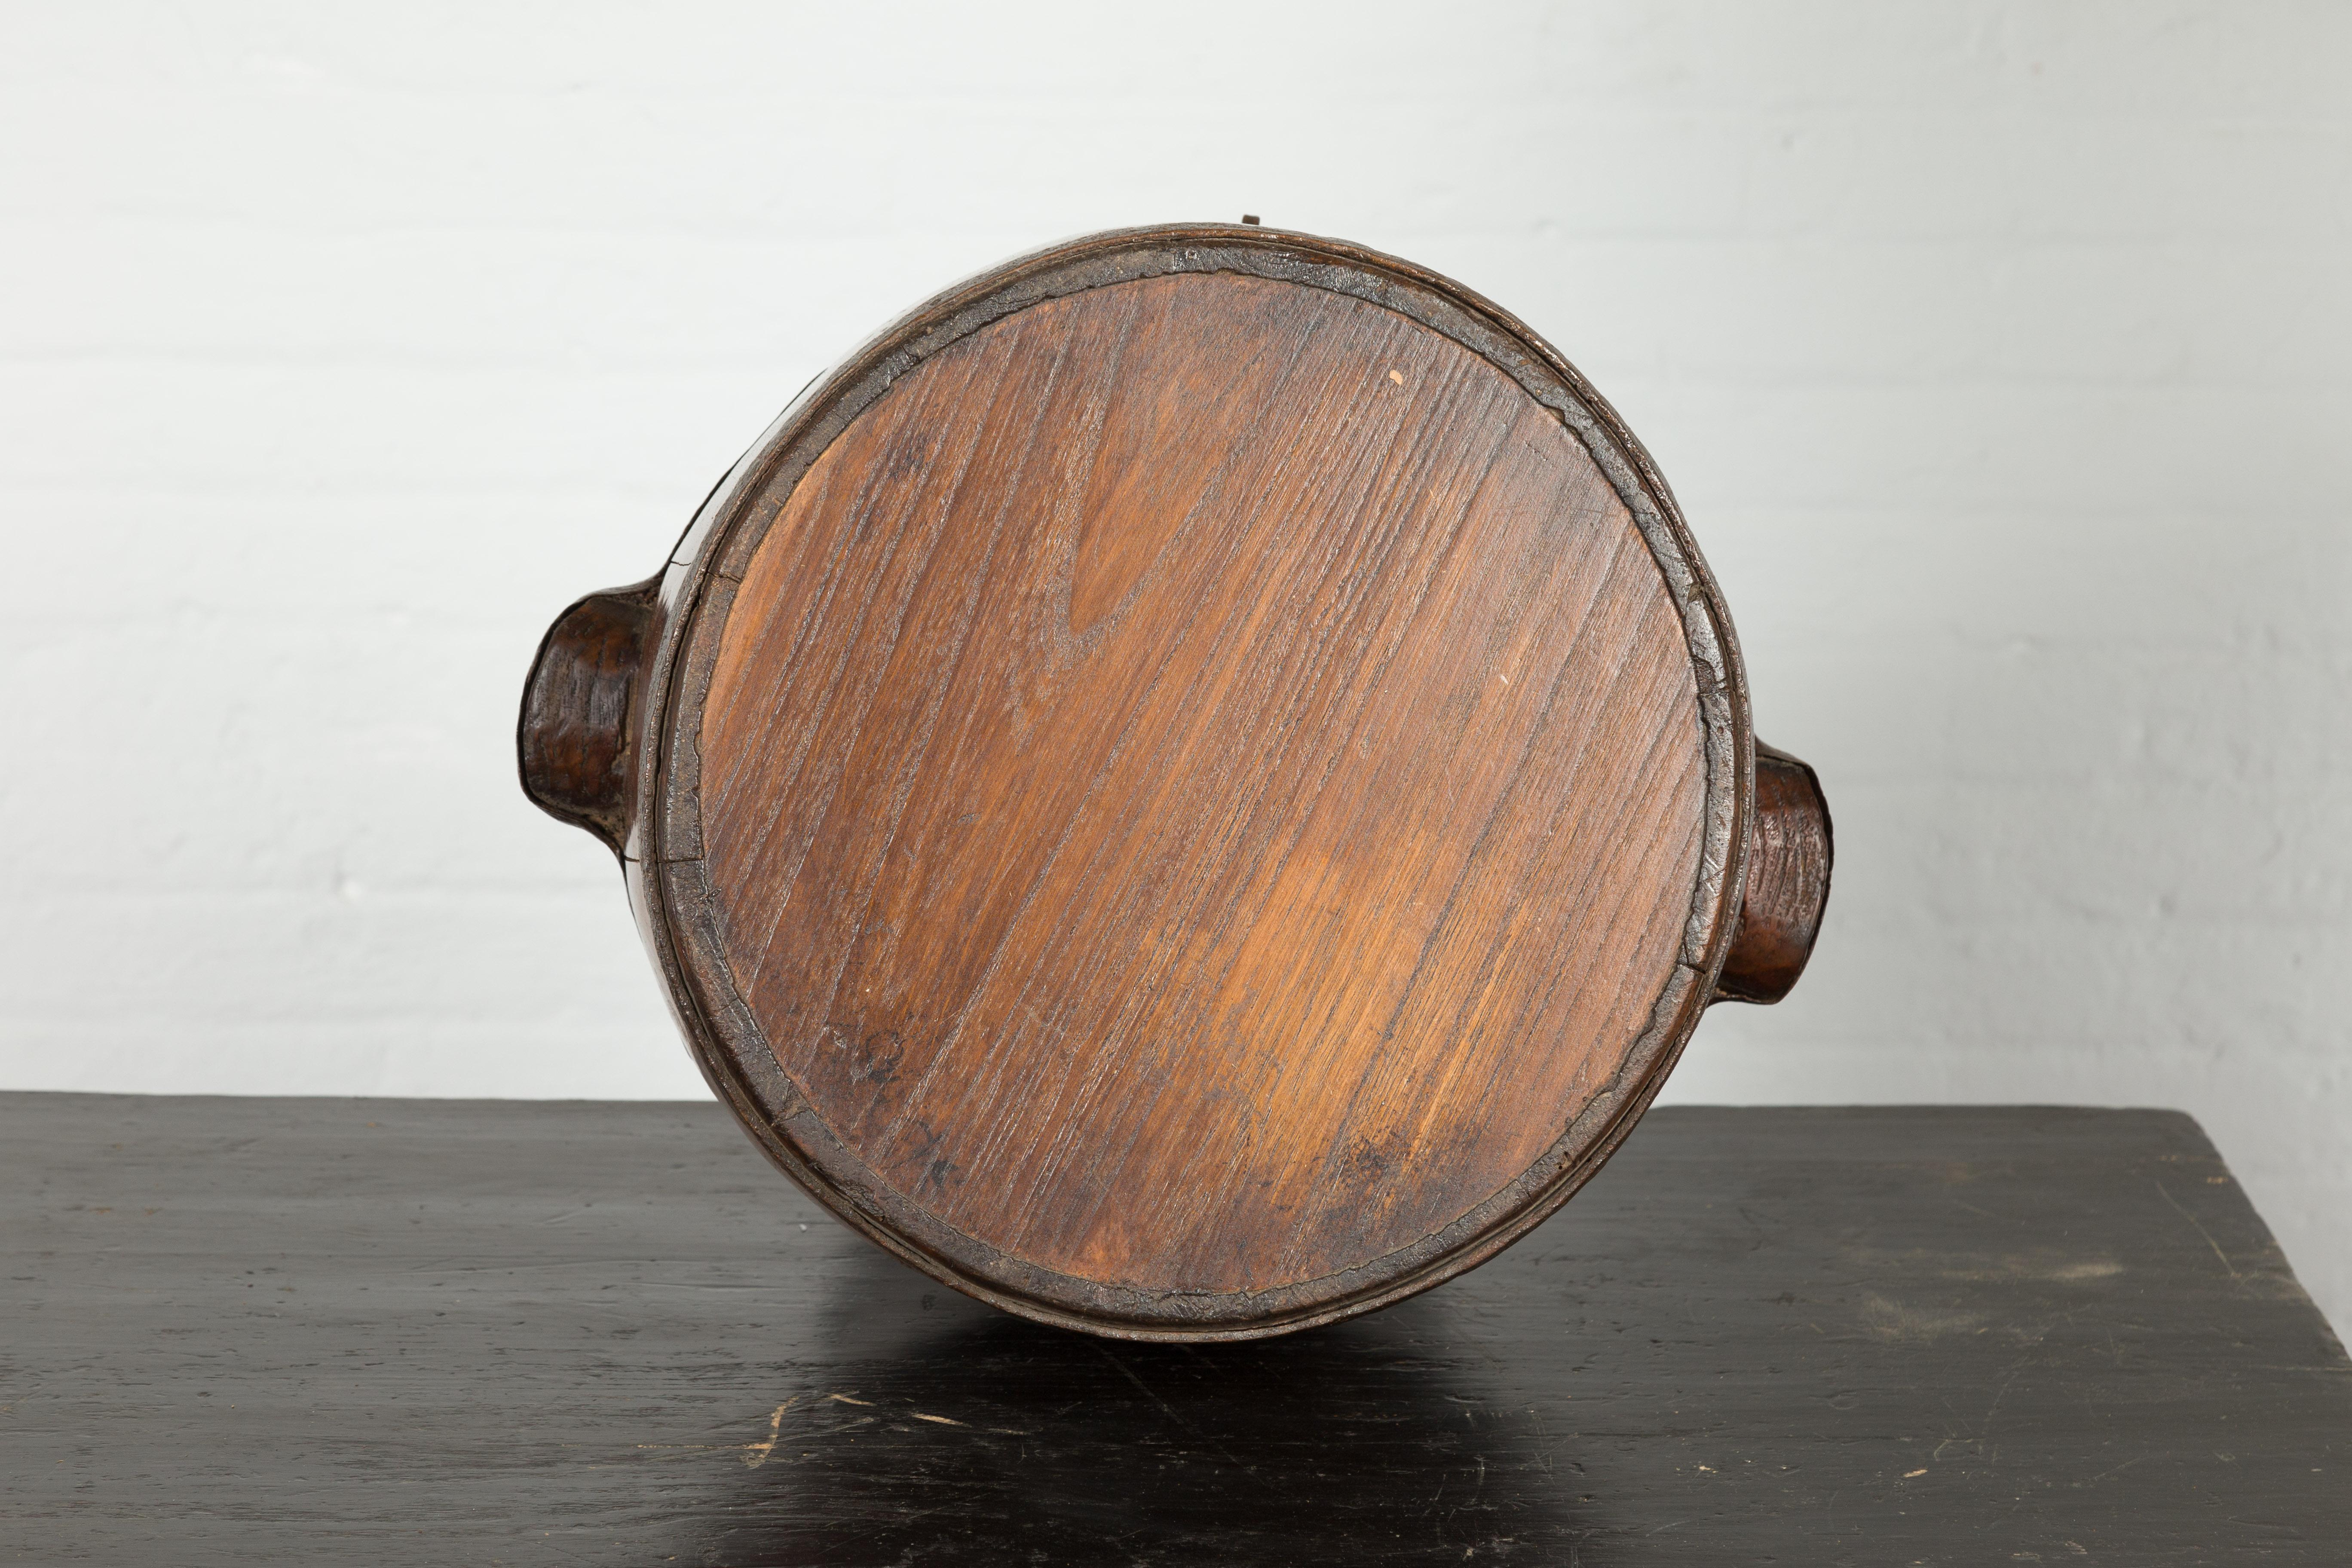 Chinese Qing Dynasty Period 19th Century Pear-Shaped Wooden Grain Basket For Sale 8